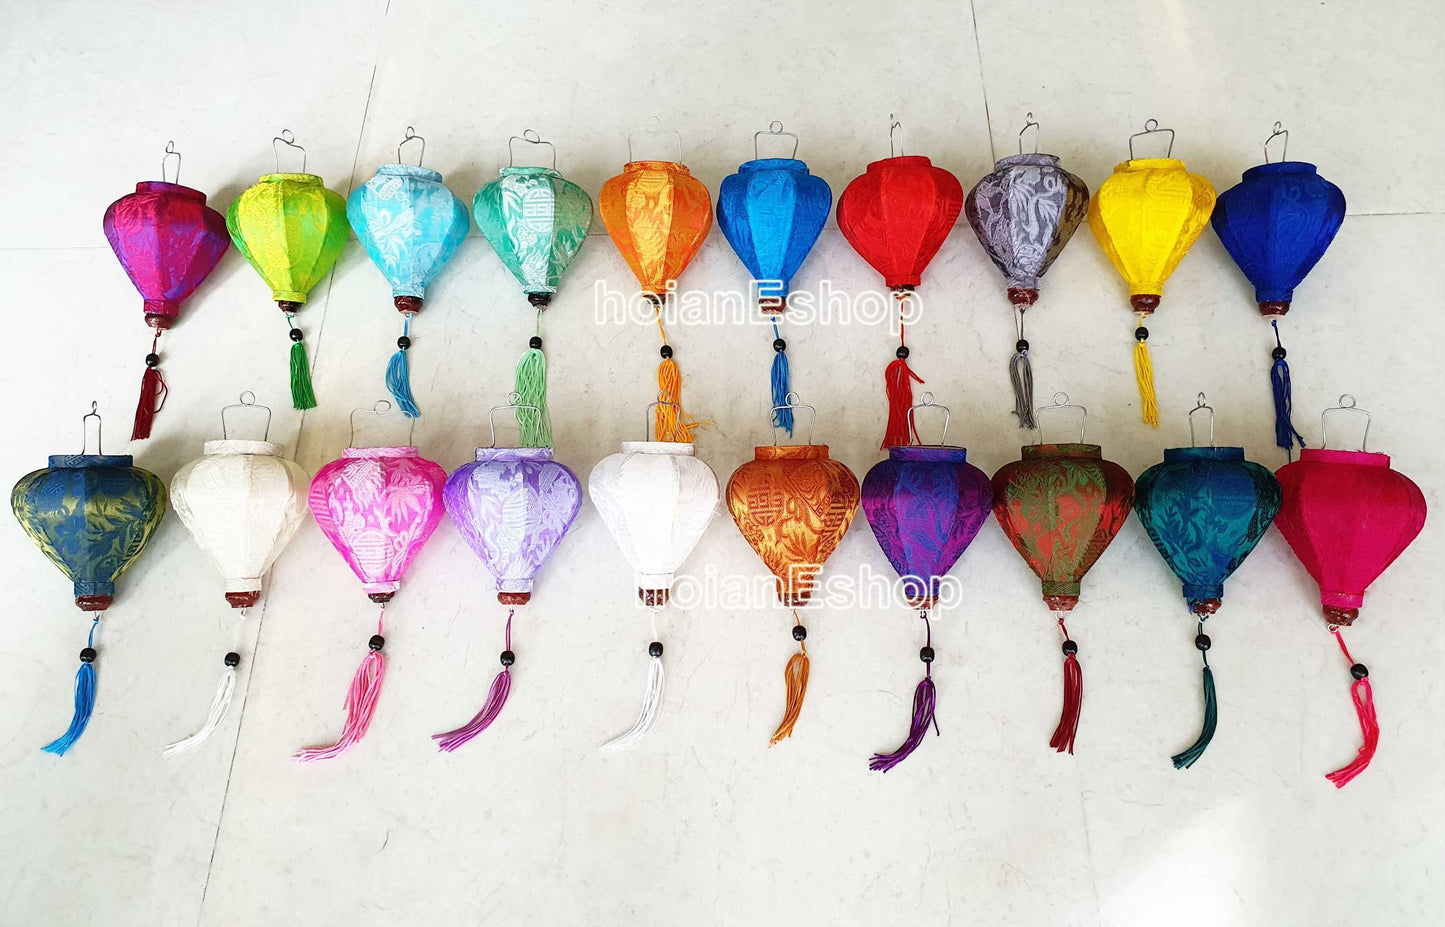 Set 20 String Mini Silk Lanterns 10cm with mix of 20 Colors for Wedding Party Decor Wedding Gifts Christmas gift, gift for baby girl